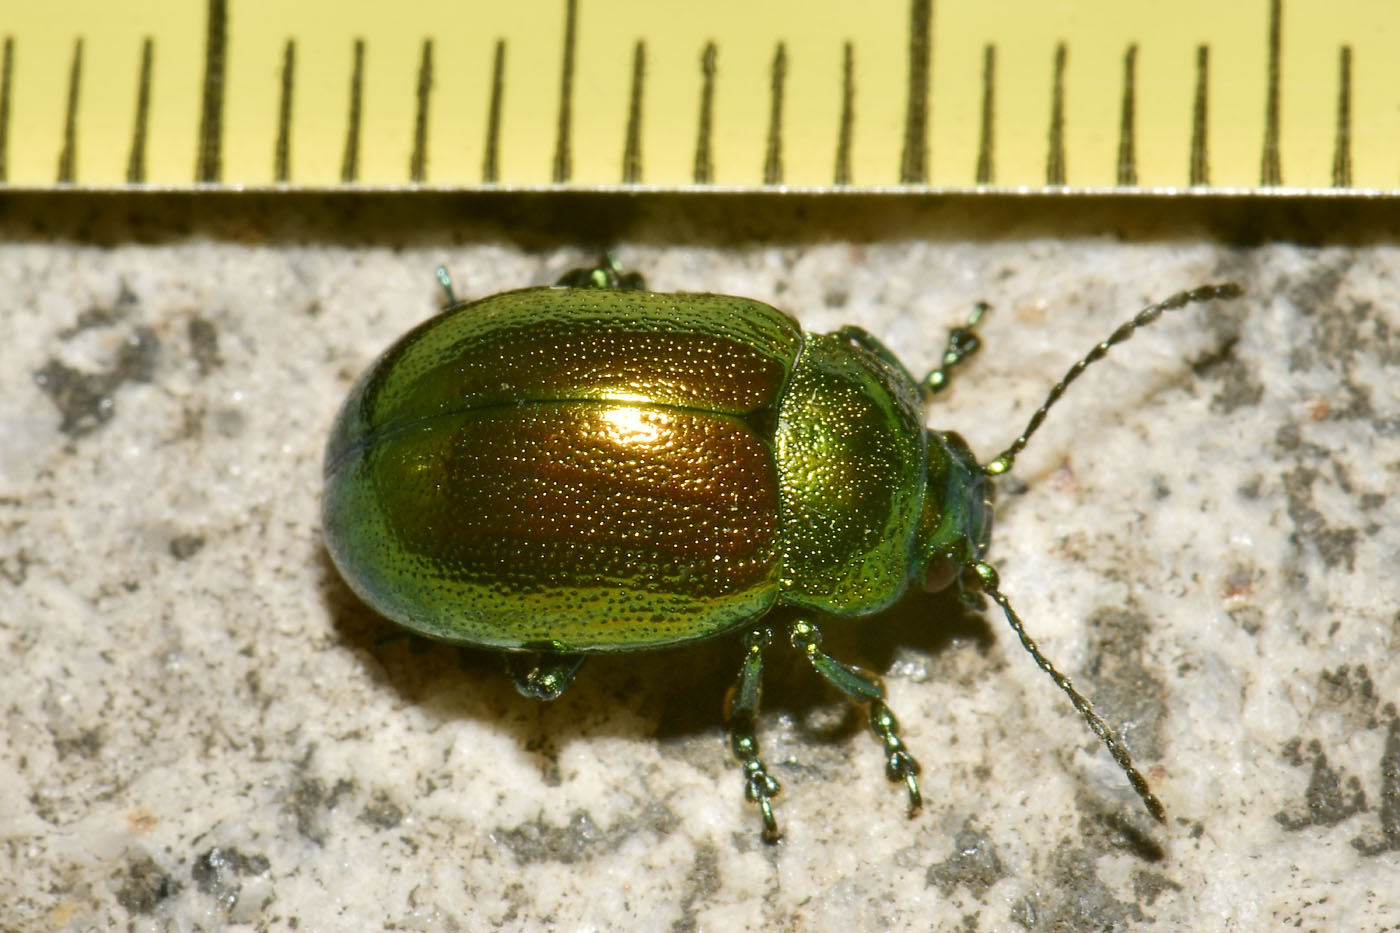 Chrysomelidae: Chrysolina herbacea? S